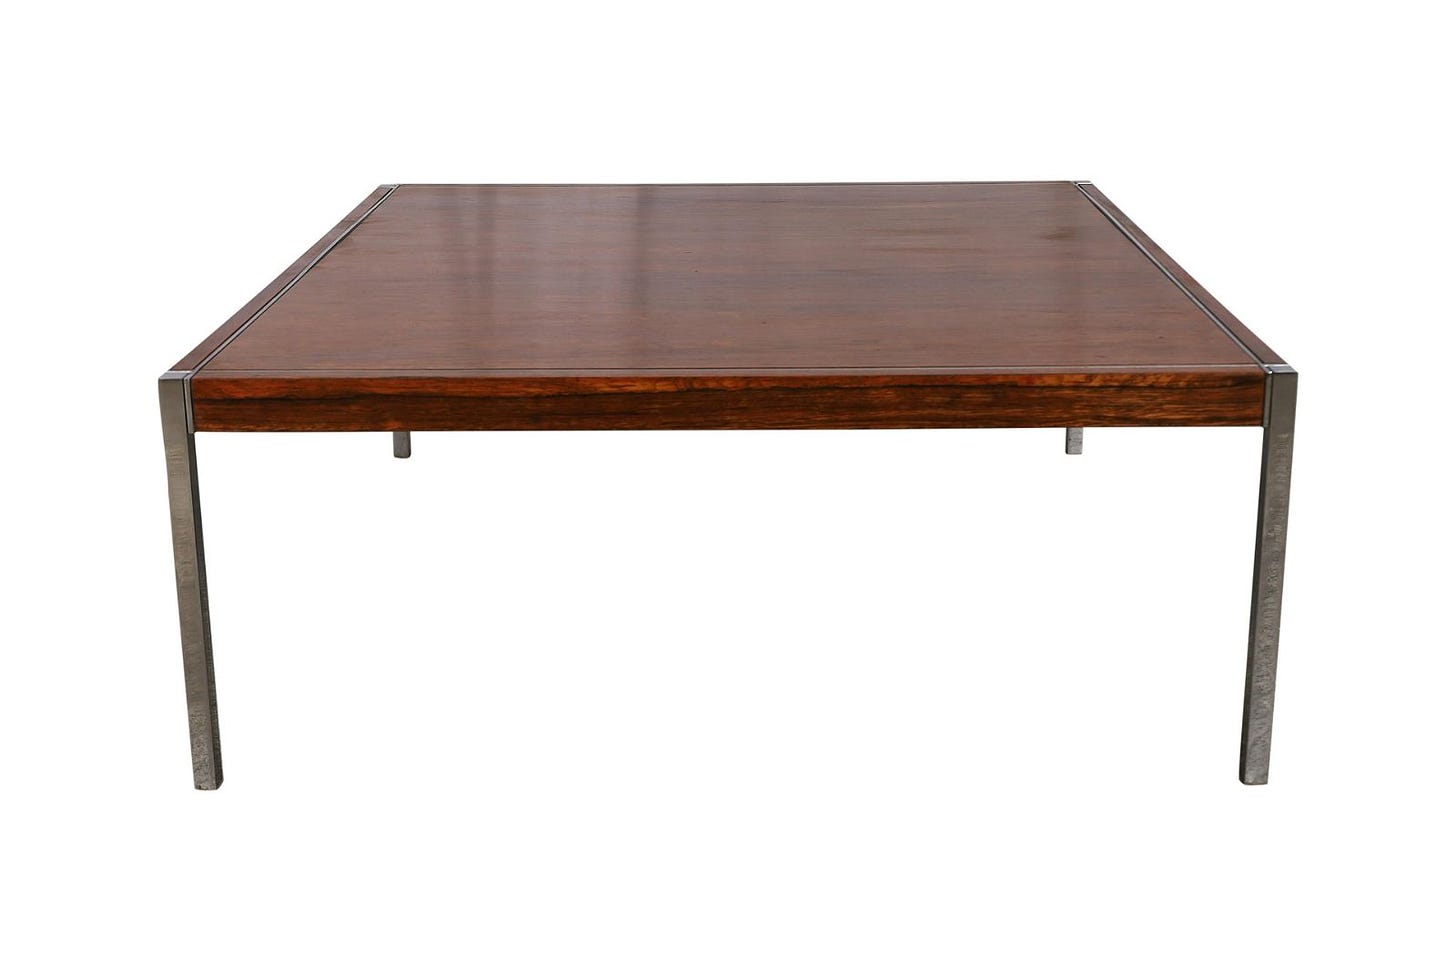 Richard Schultz - Knoll Rosewood Coffee Table